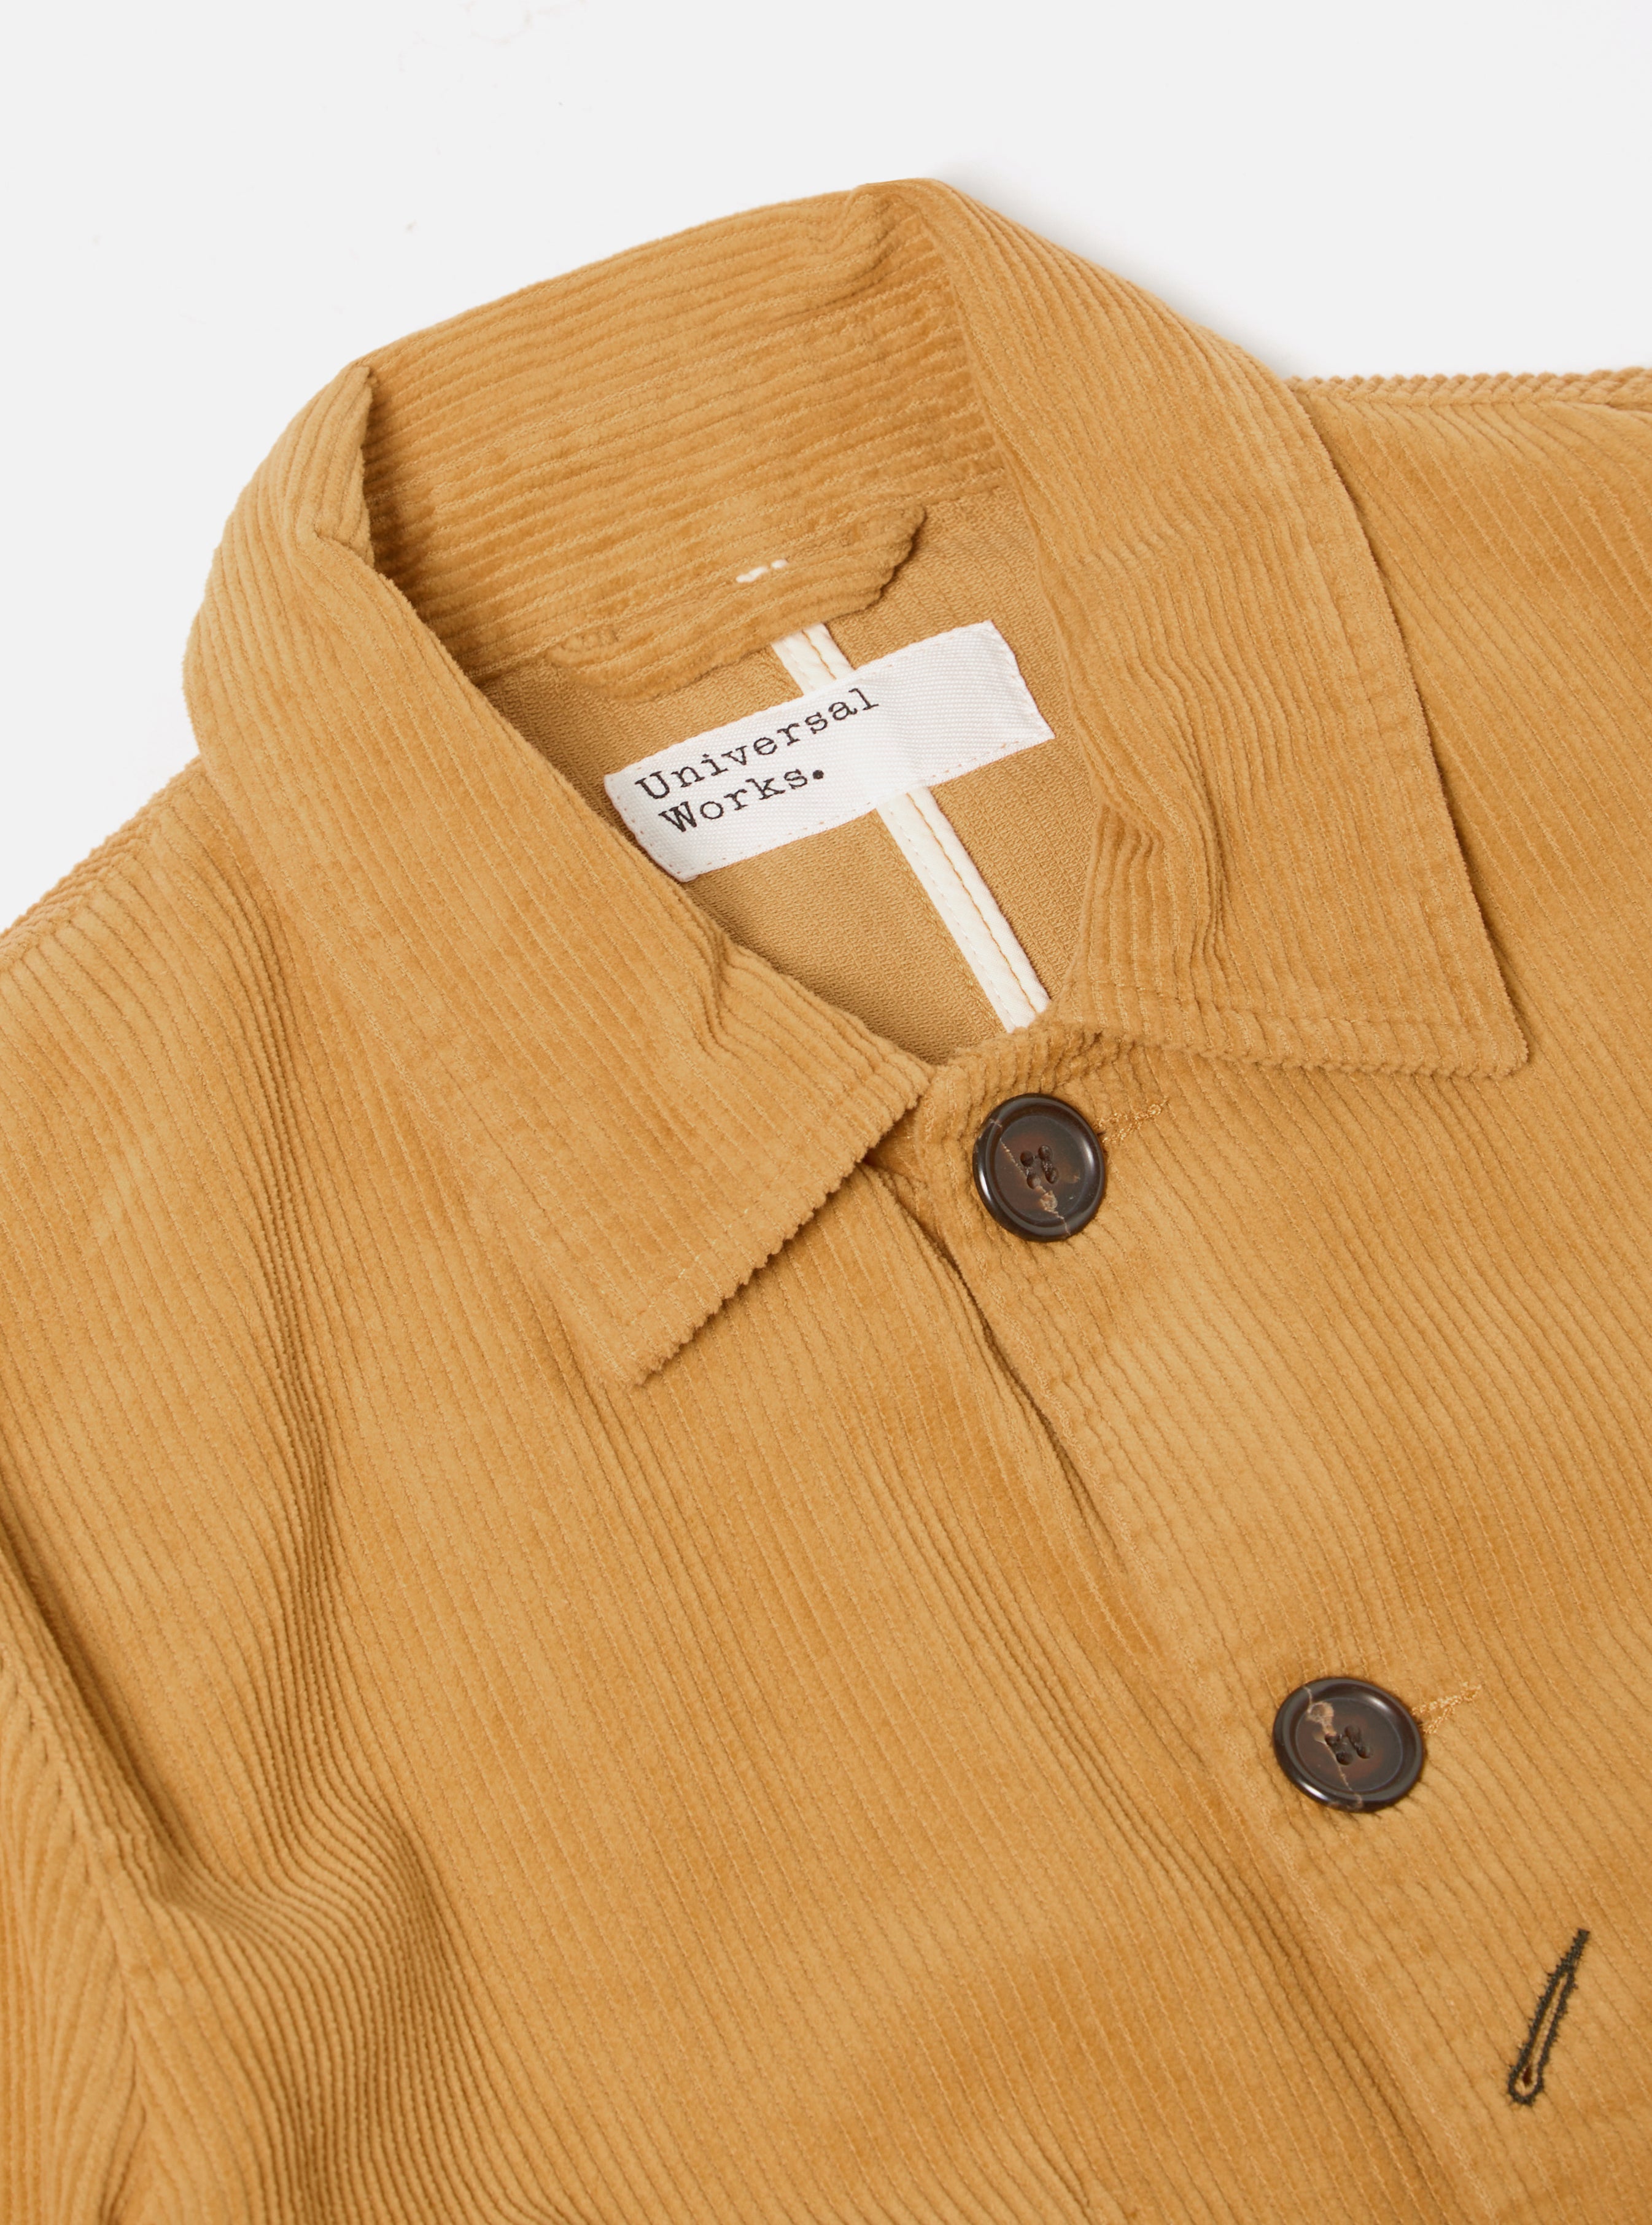 Universal Works Bakers Jacket in Corn Cord